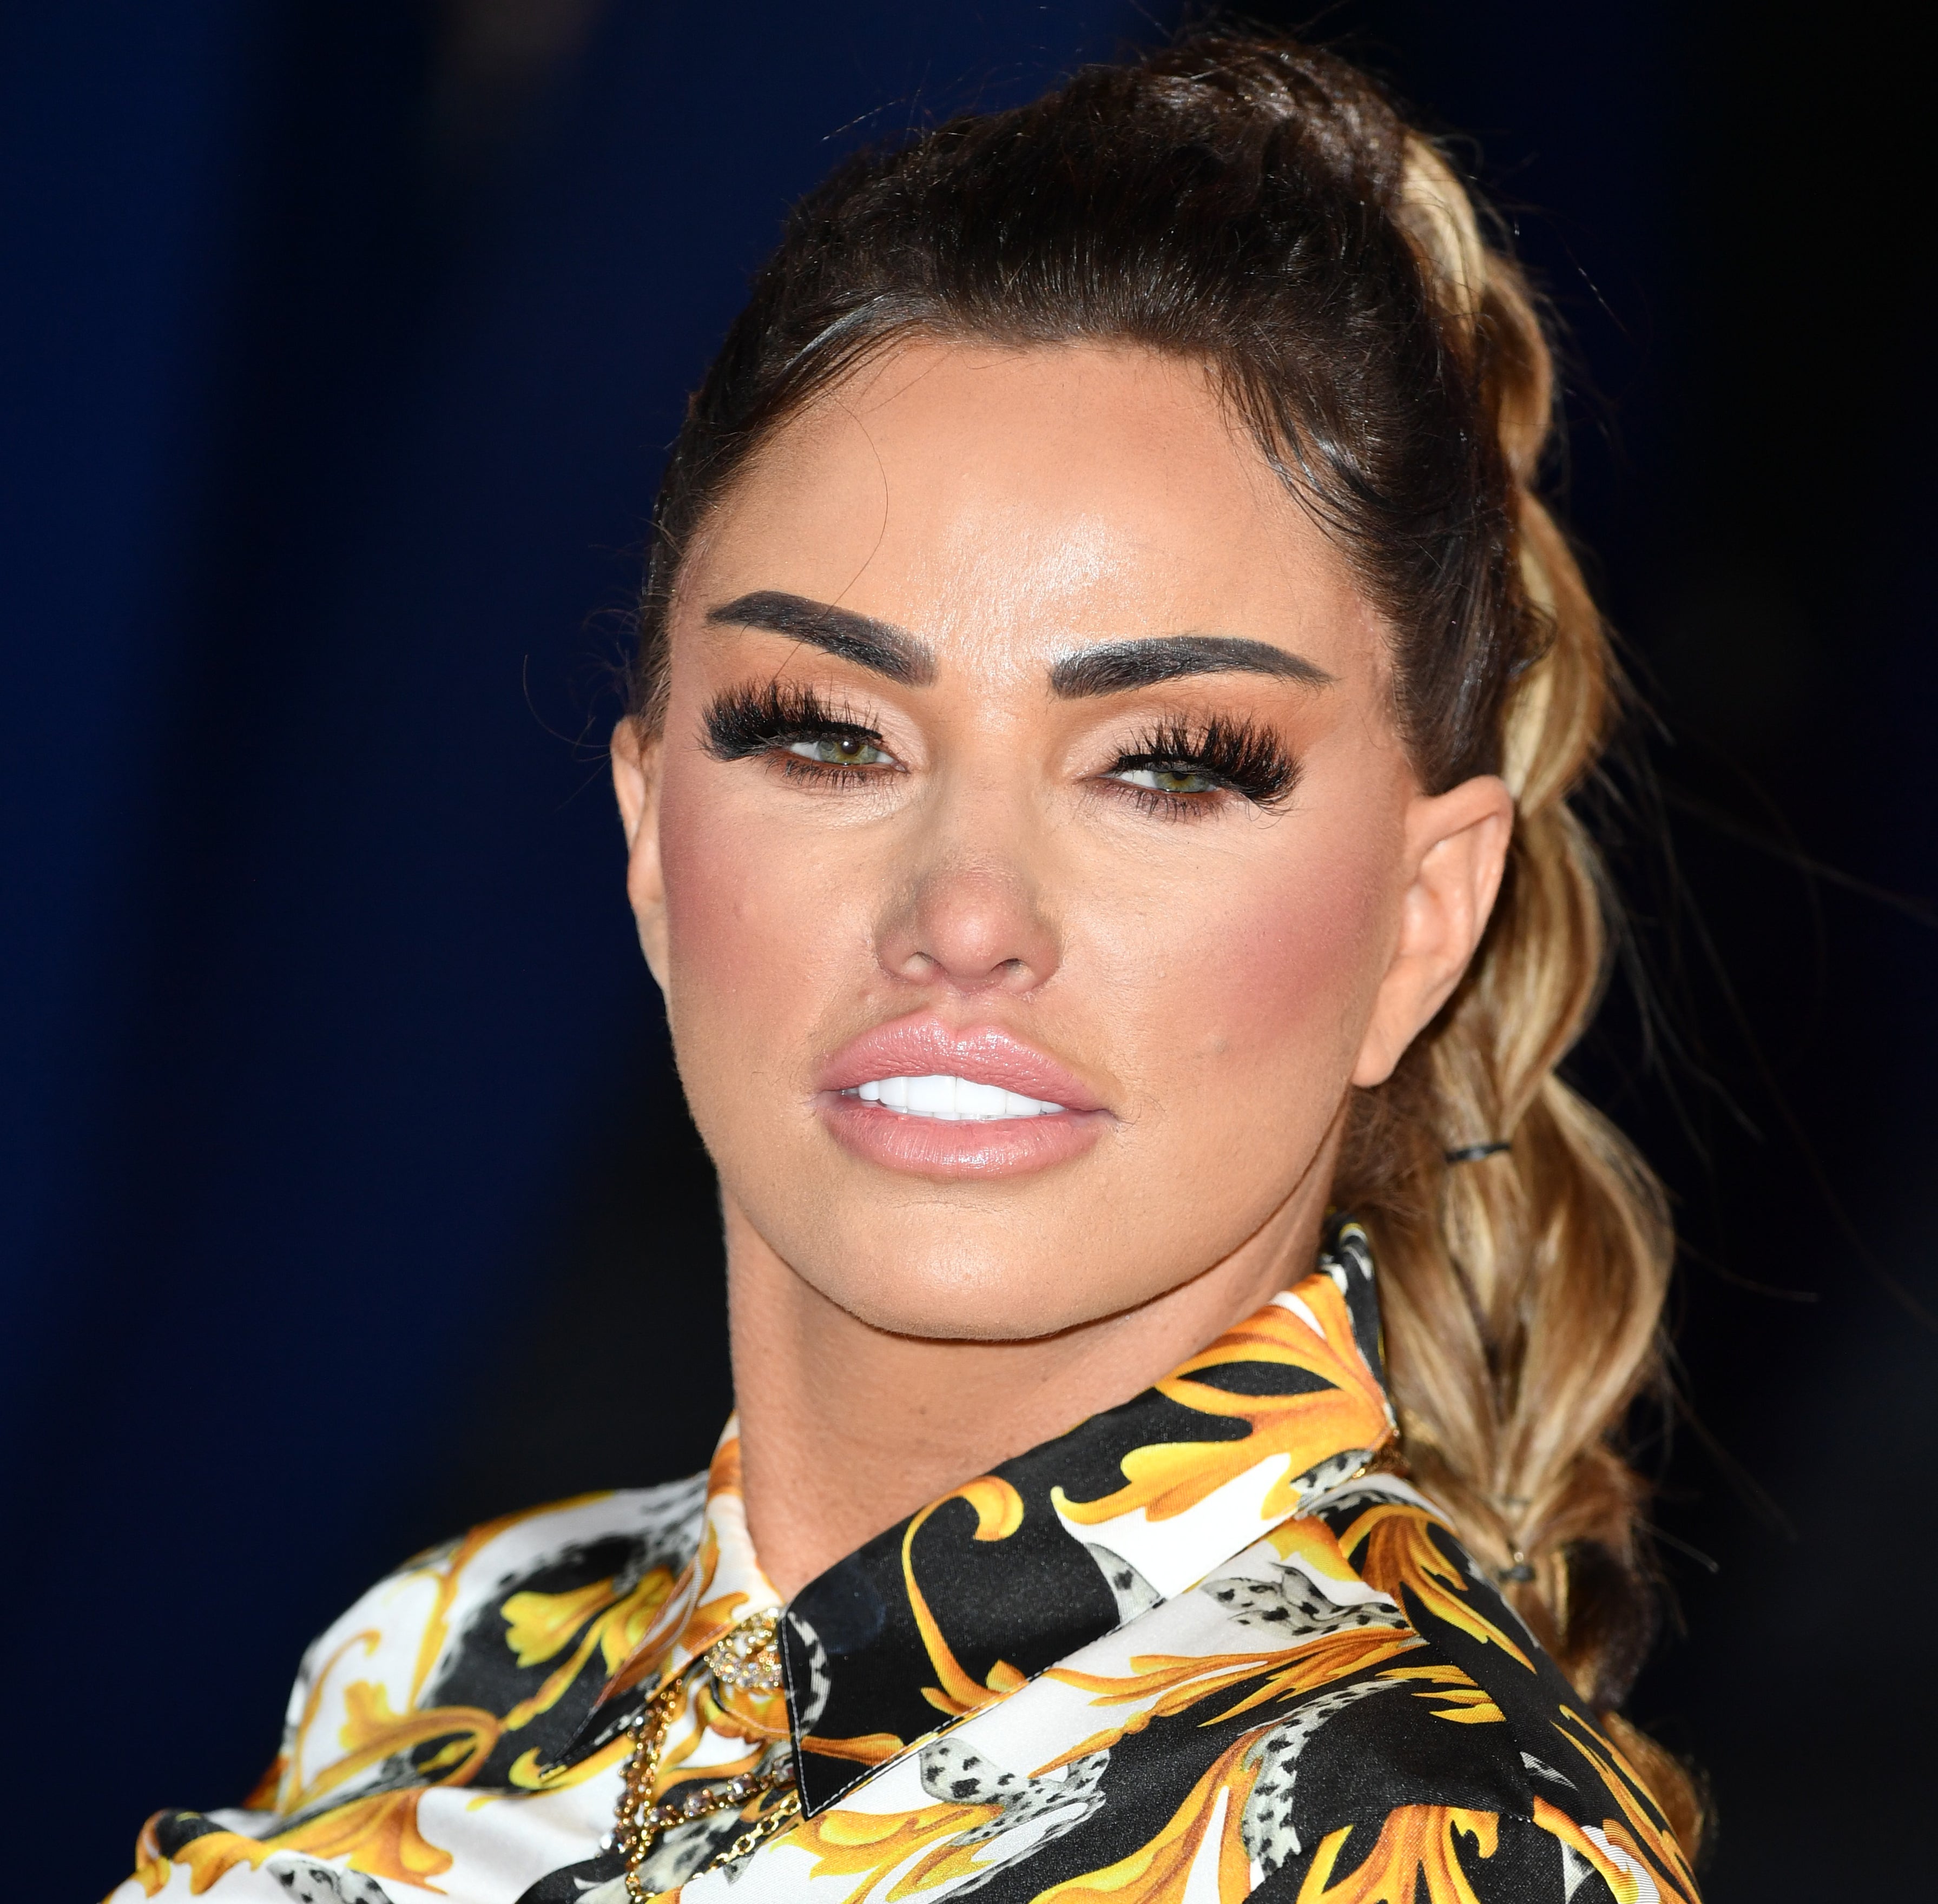 TV personality reflects on her mental health struggles in new Channel 4 documentary Katie Price: Trauma and Me